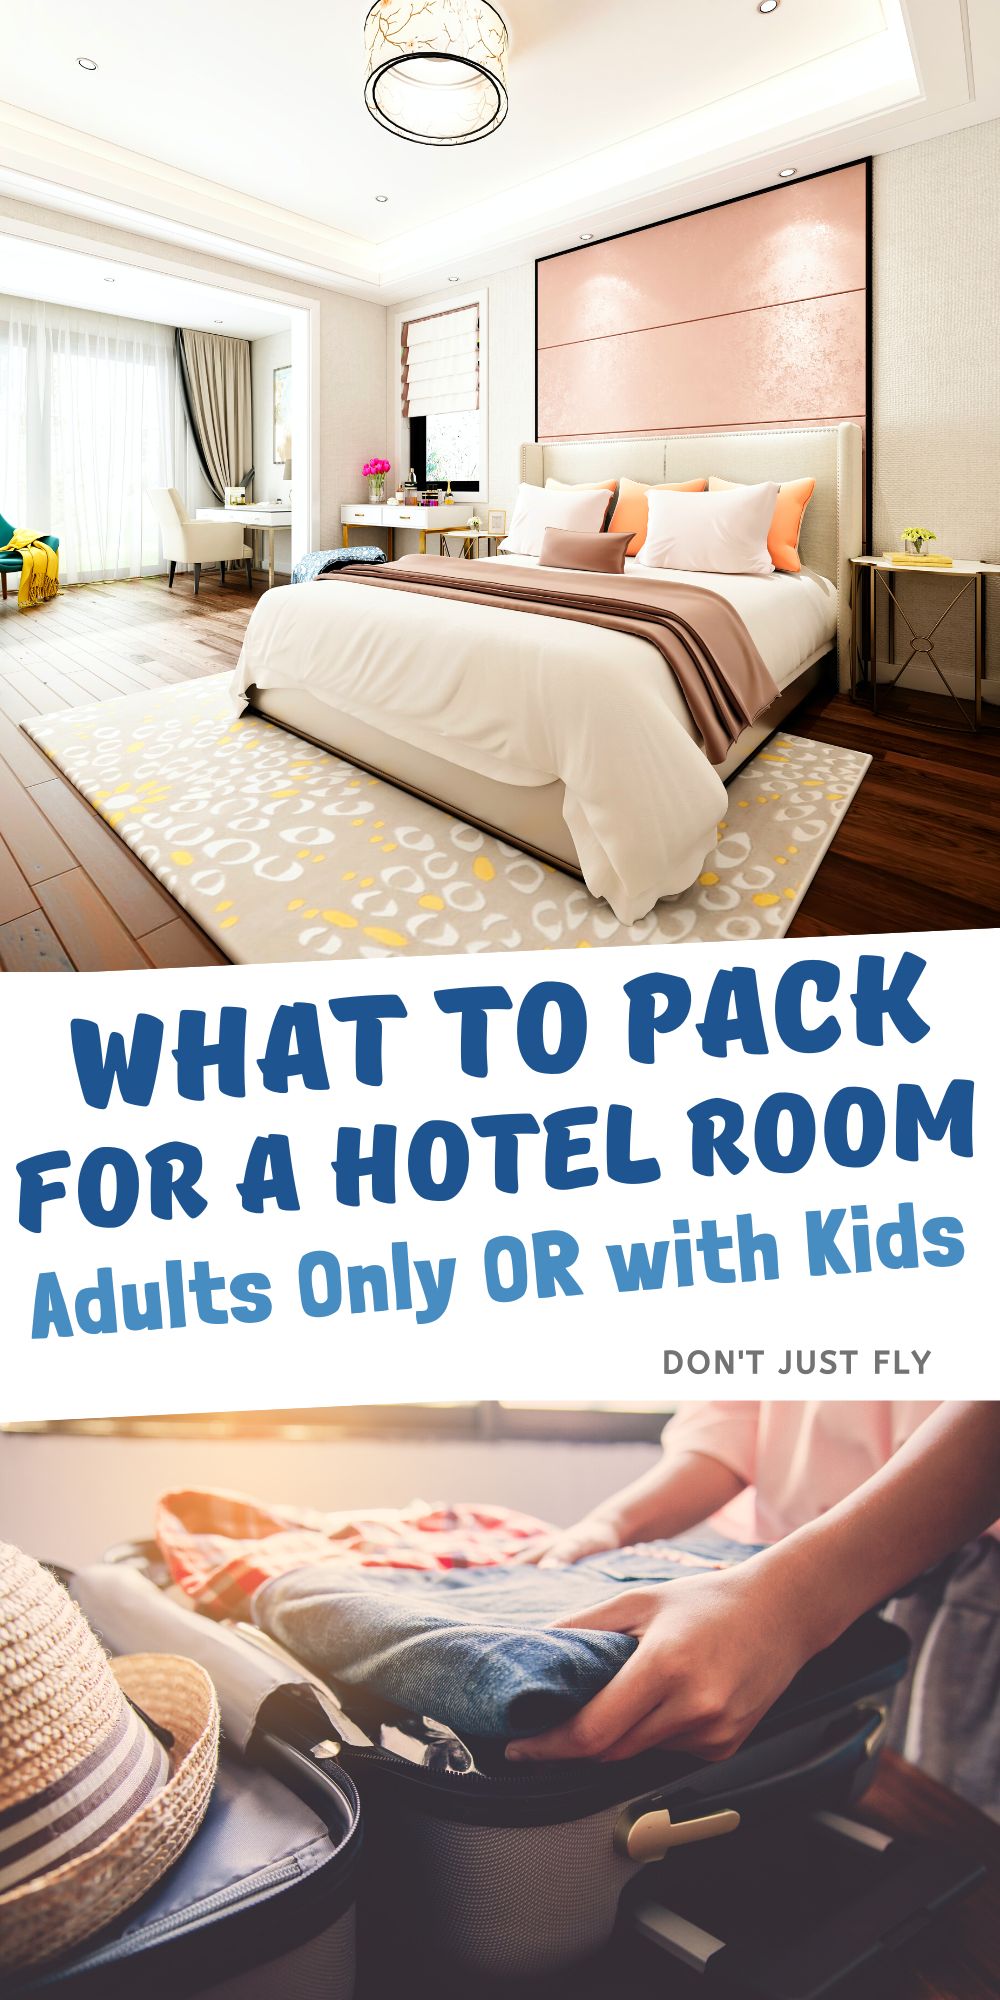 A photo collage shows a hotel room on top and a picture of a person packing a suitcase below.